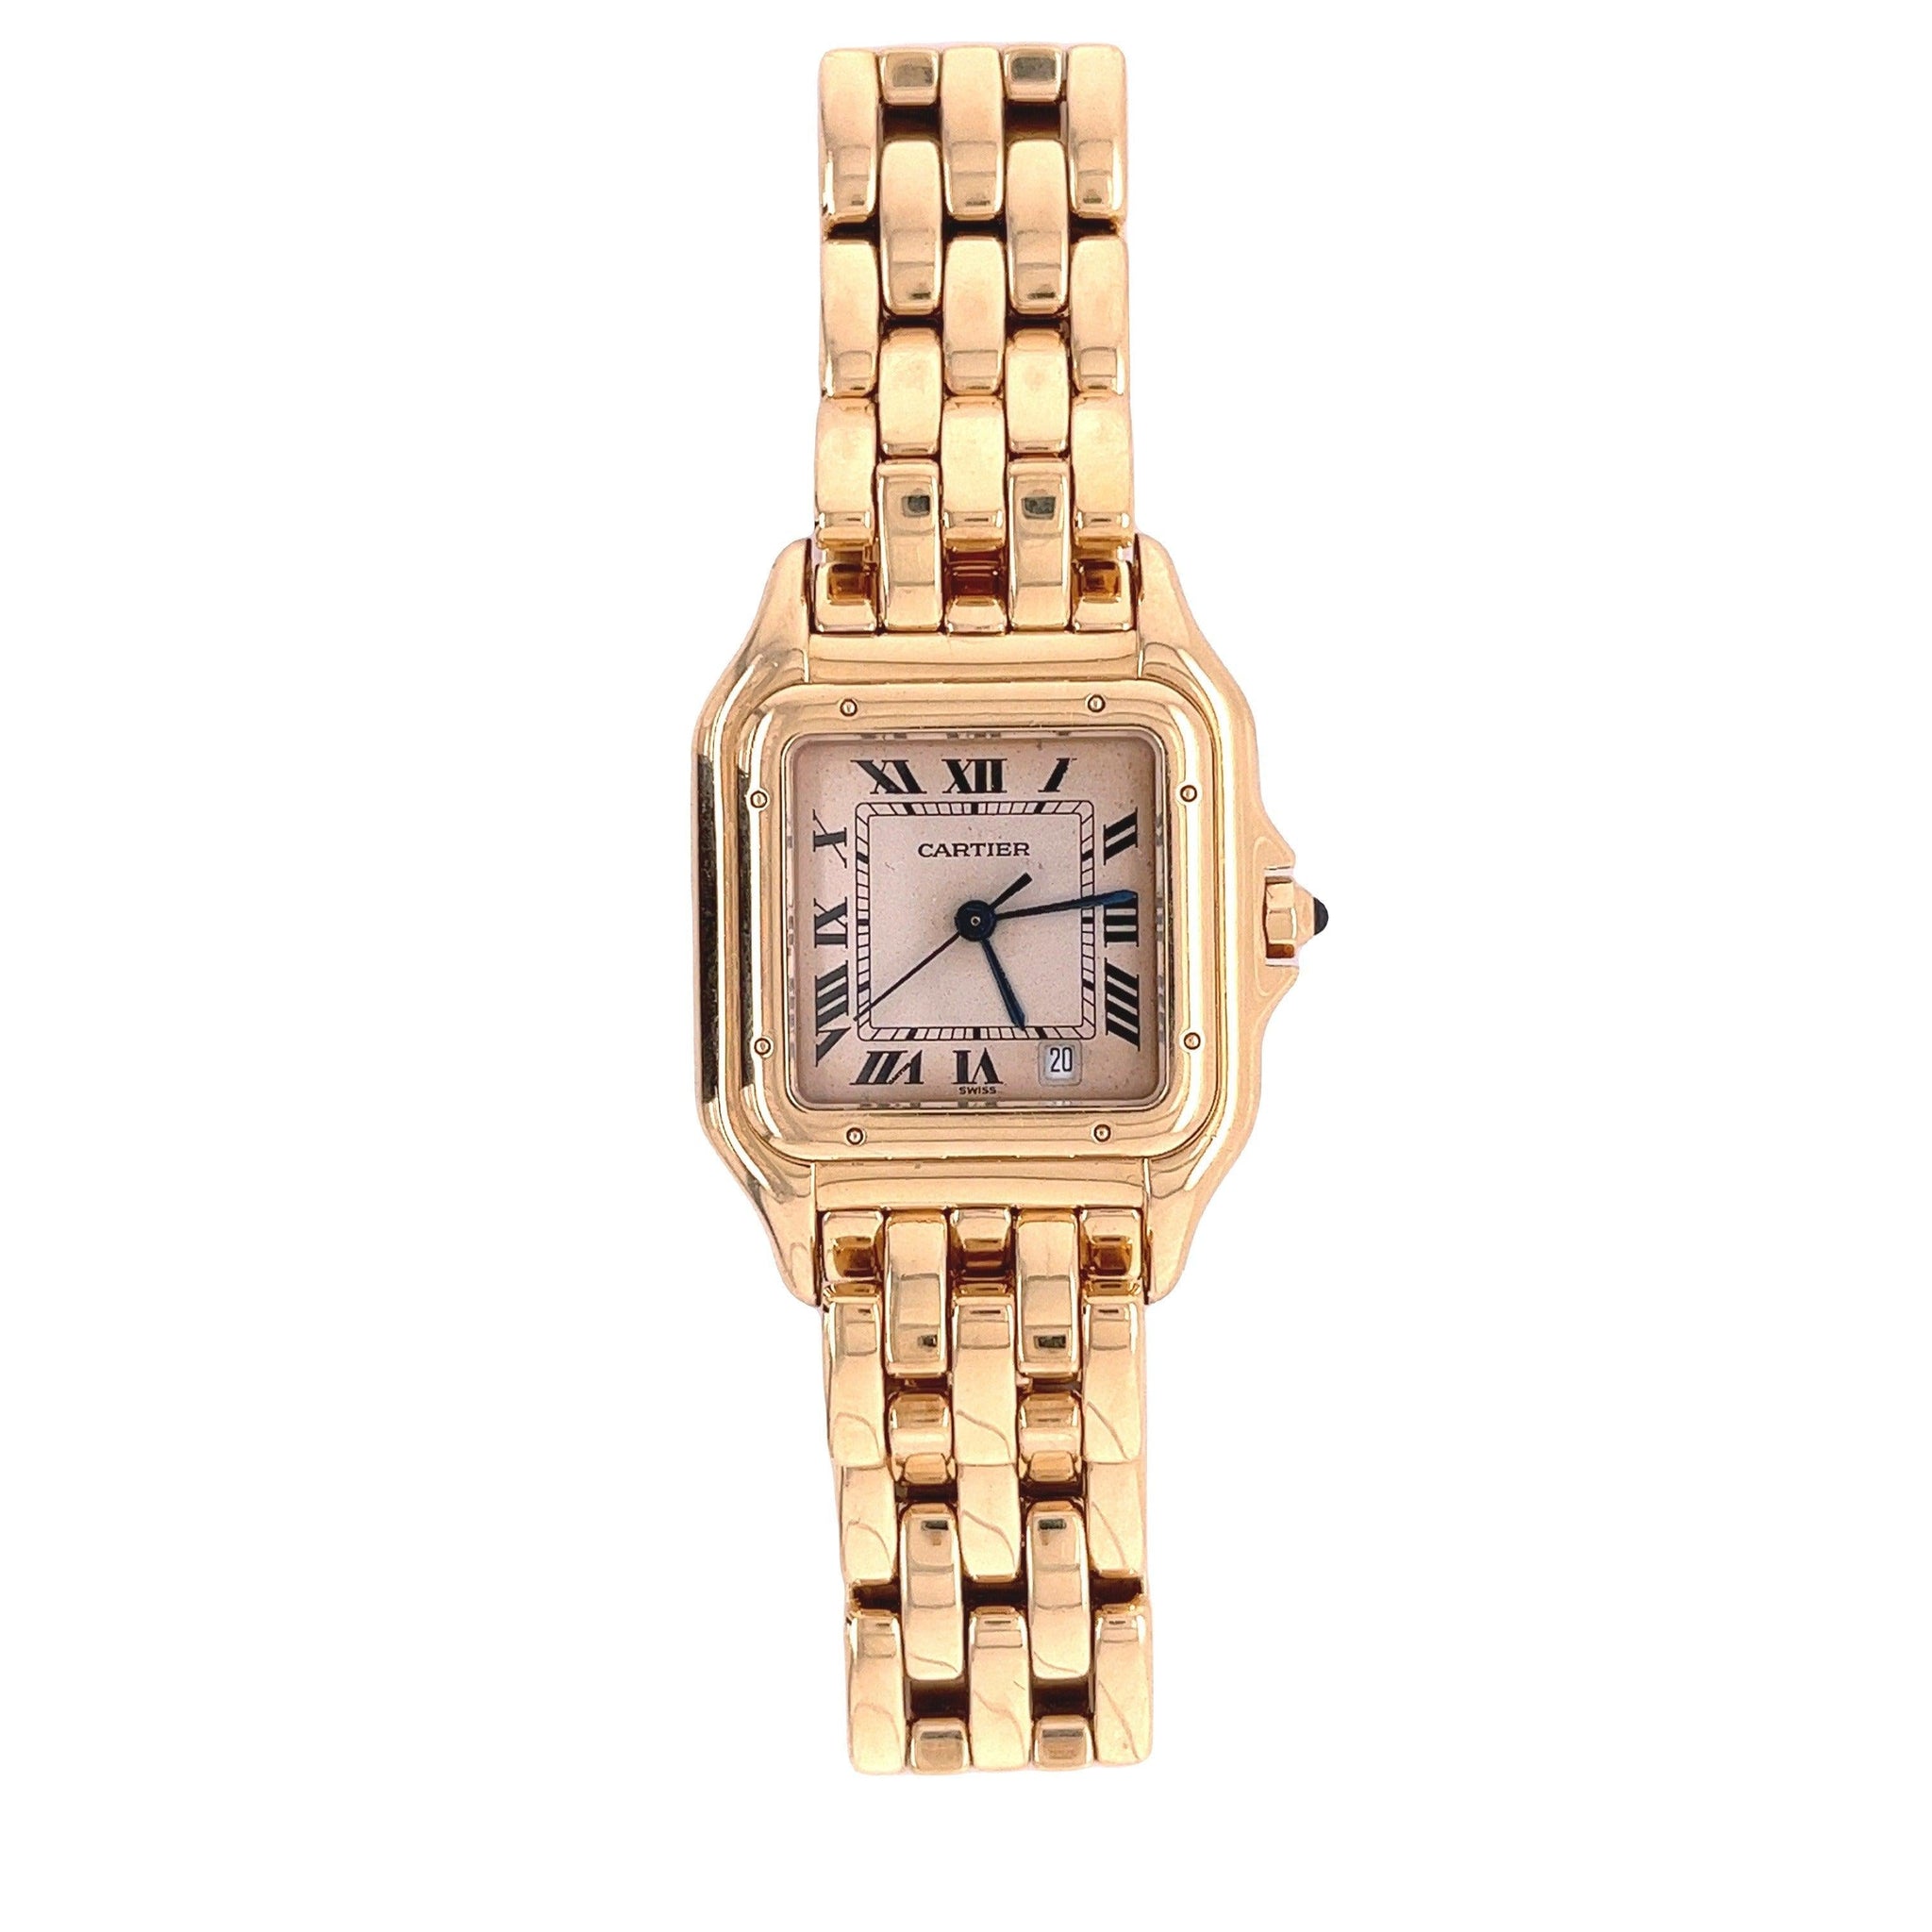 Cartier Panthere Ladies 27mm Large Size Watch in 18K Yellow Gold Model 8839-Watches-ASSAY